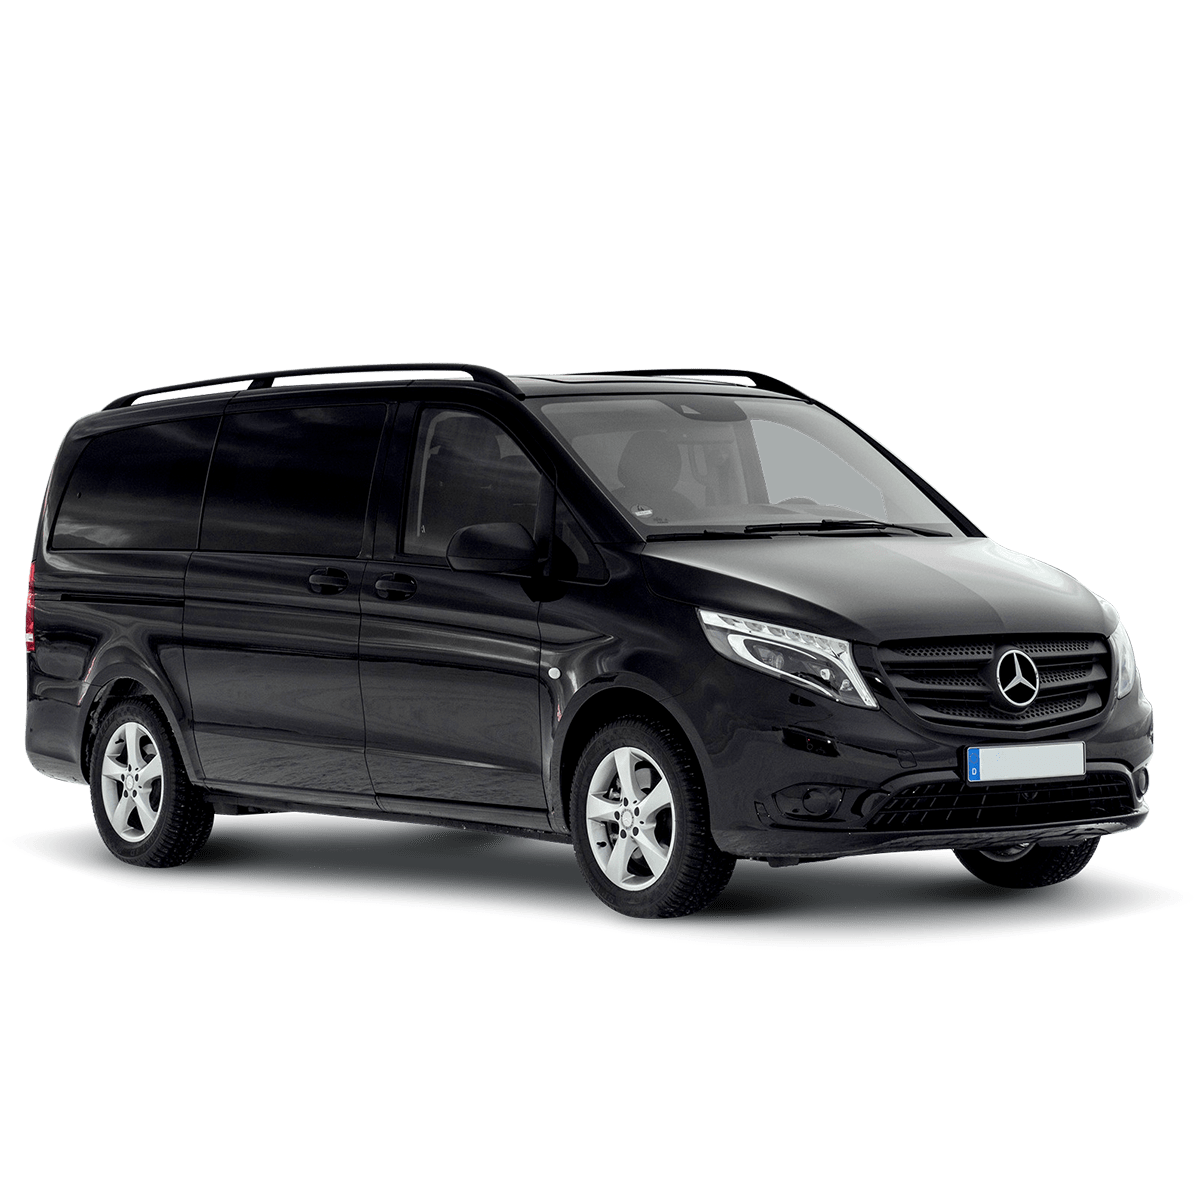 ﻿For example: MERCEDES Vito matic